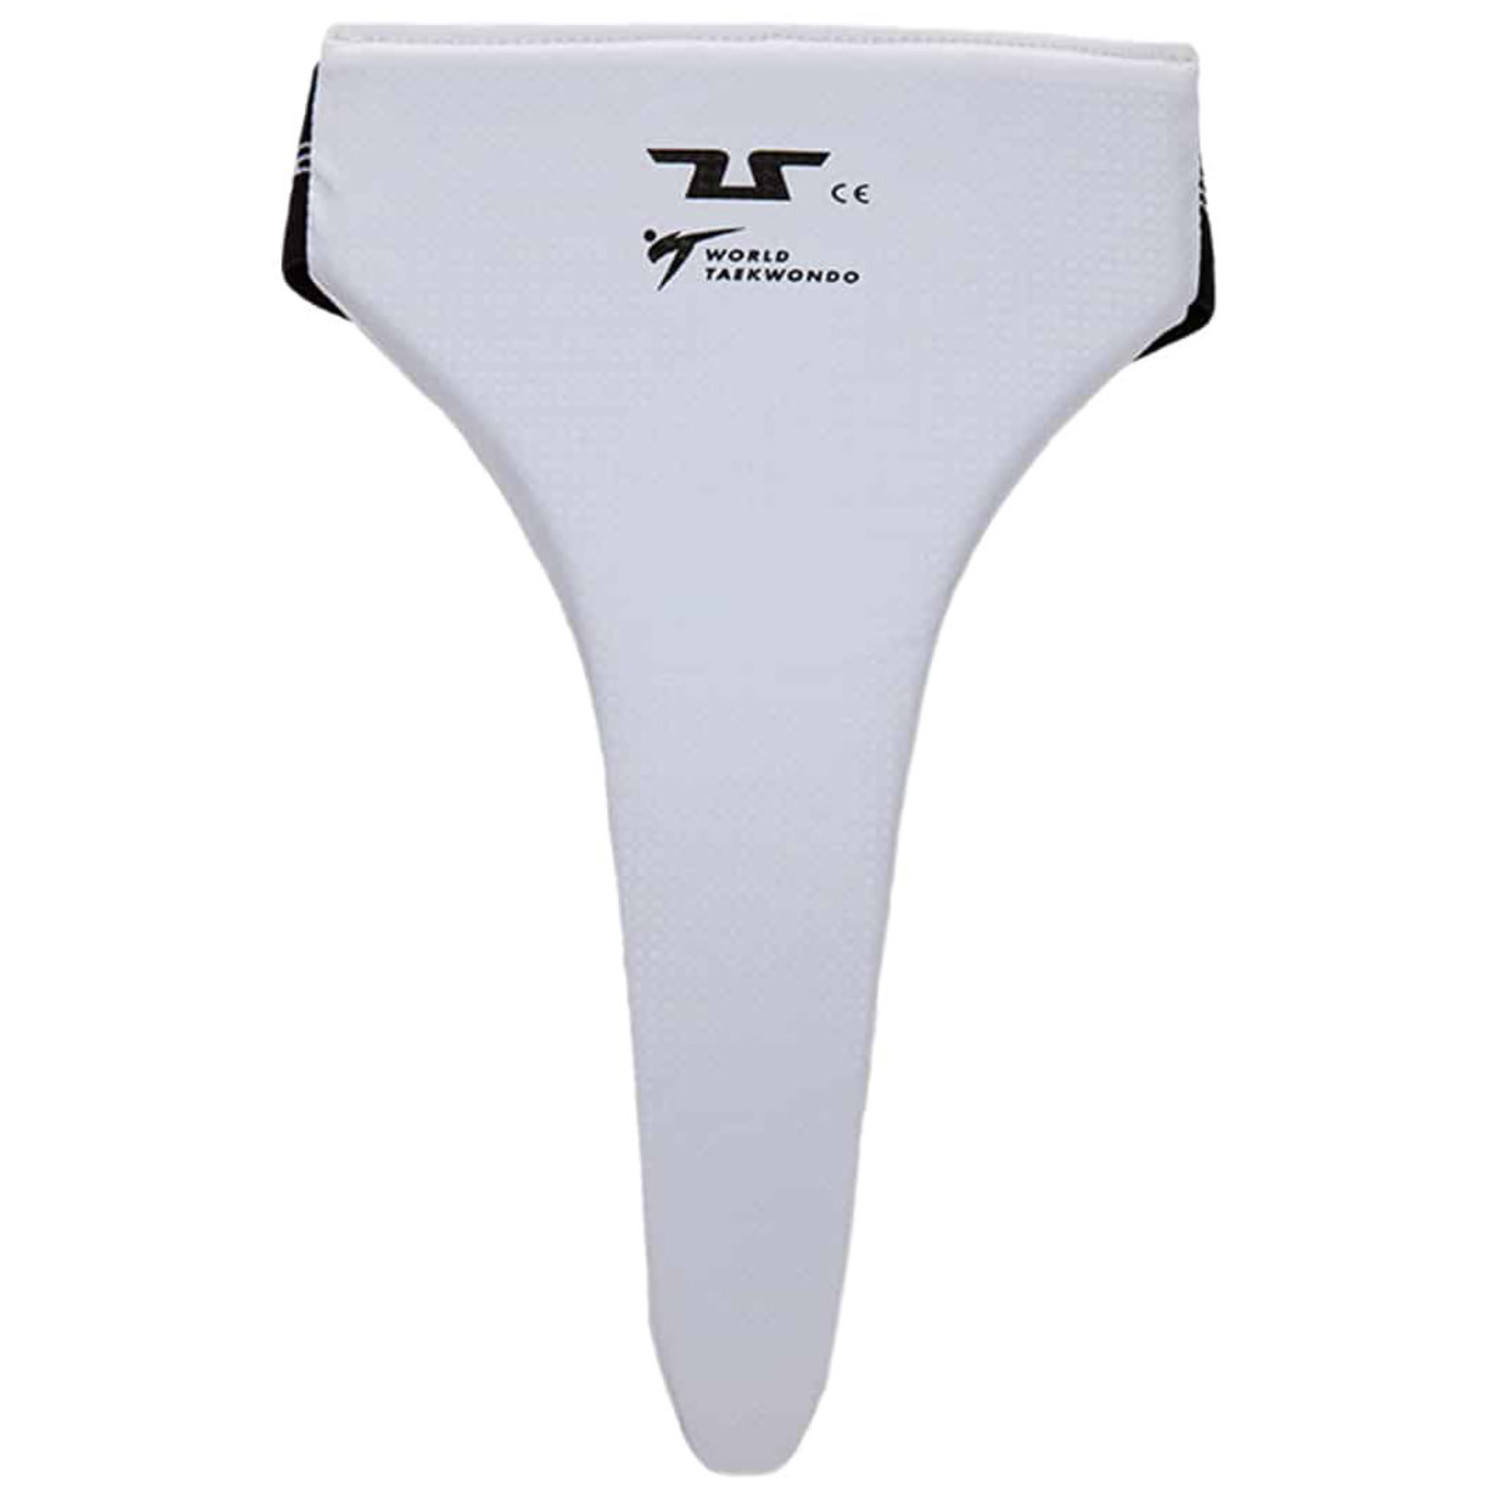 Buy Female Groin Guard Protector for Karate